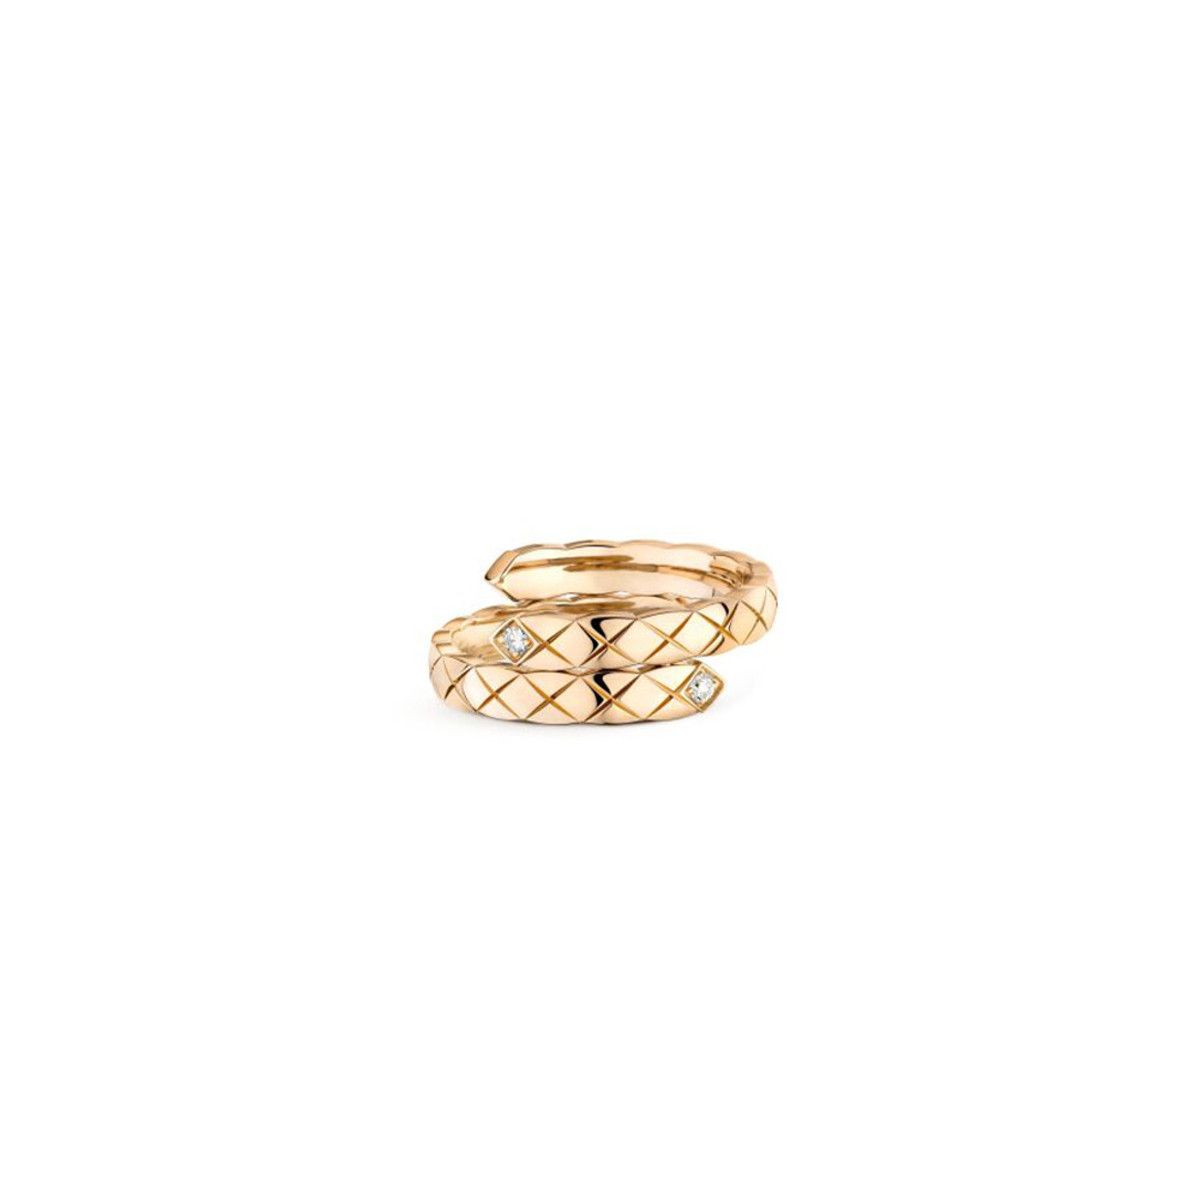 CHANEL COCO CRUSH TOI ET MOI RING-29542 Product Image